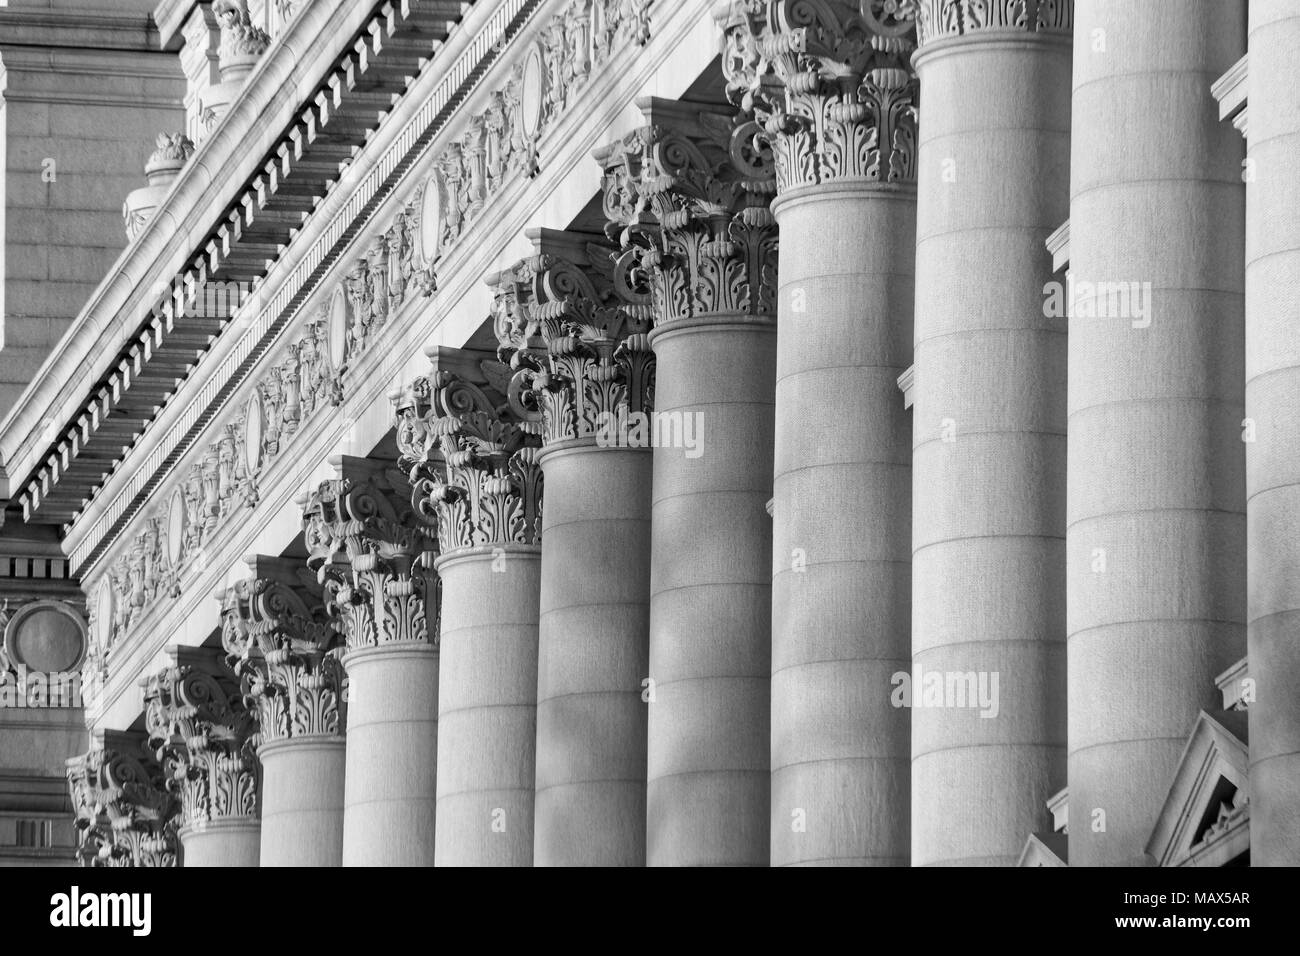 A series of Corinthian Columns shot at sunset in Black & White, this was taken in lower Manhattan at the old customs house i Stock Photo